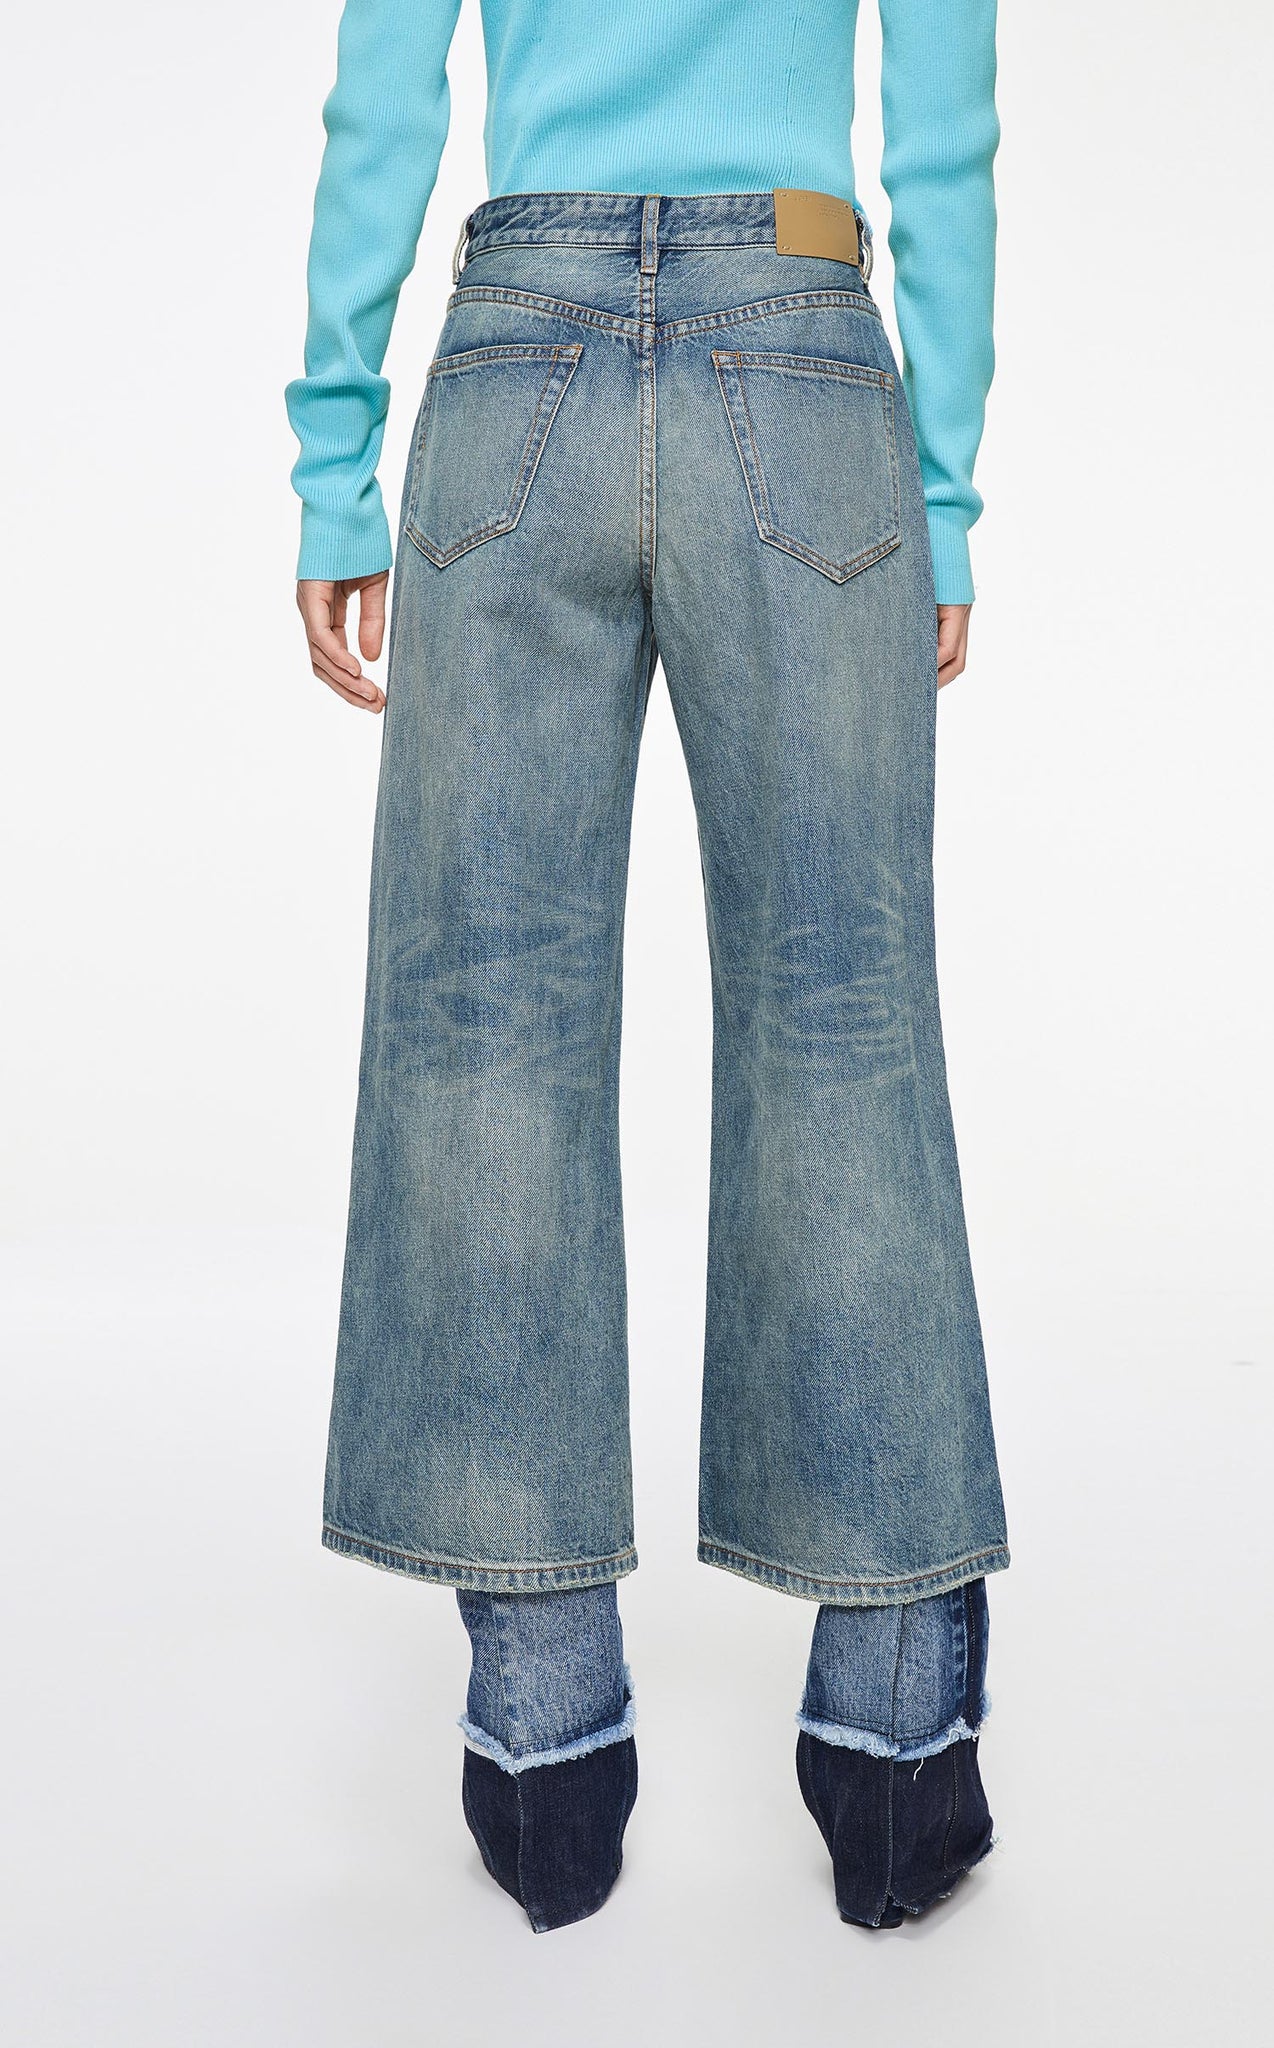 Jeans / JNBY Loose Fit Cotton Jeans